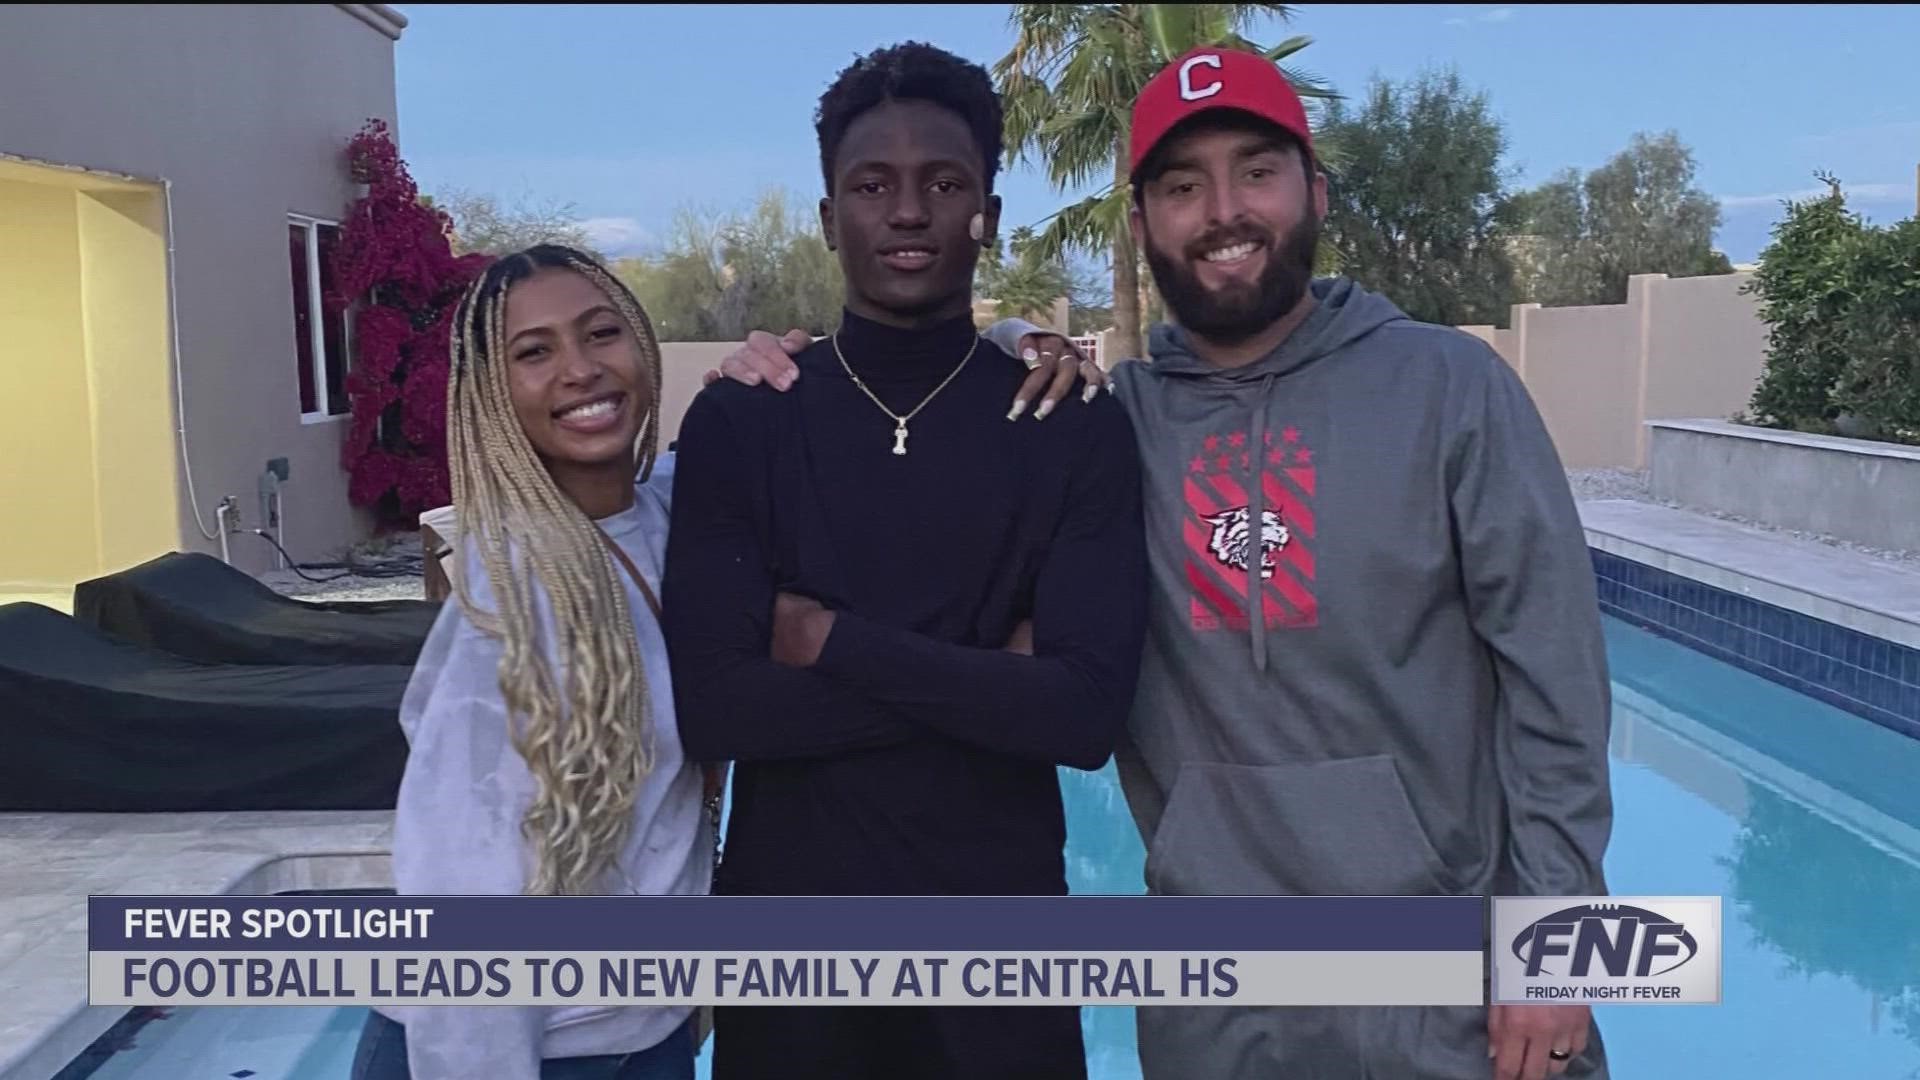 Out of Central High School, football led to a whole new family for one player, who’s more than 9,000 miles away from home.